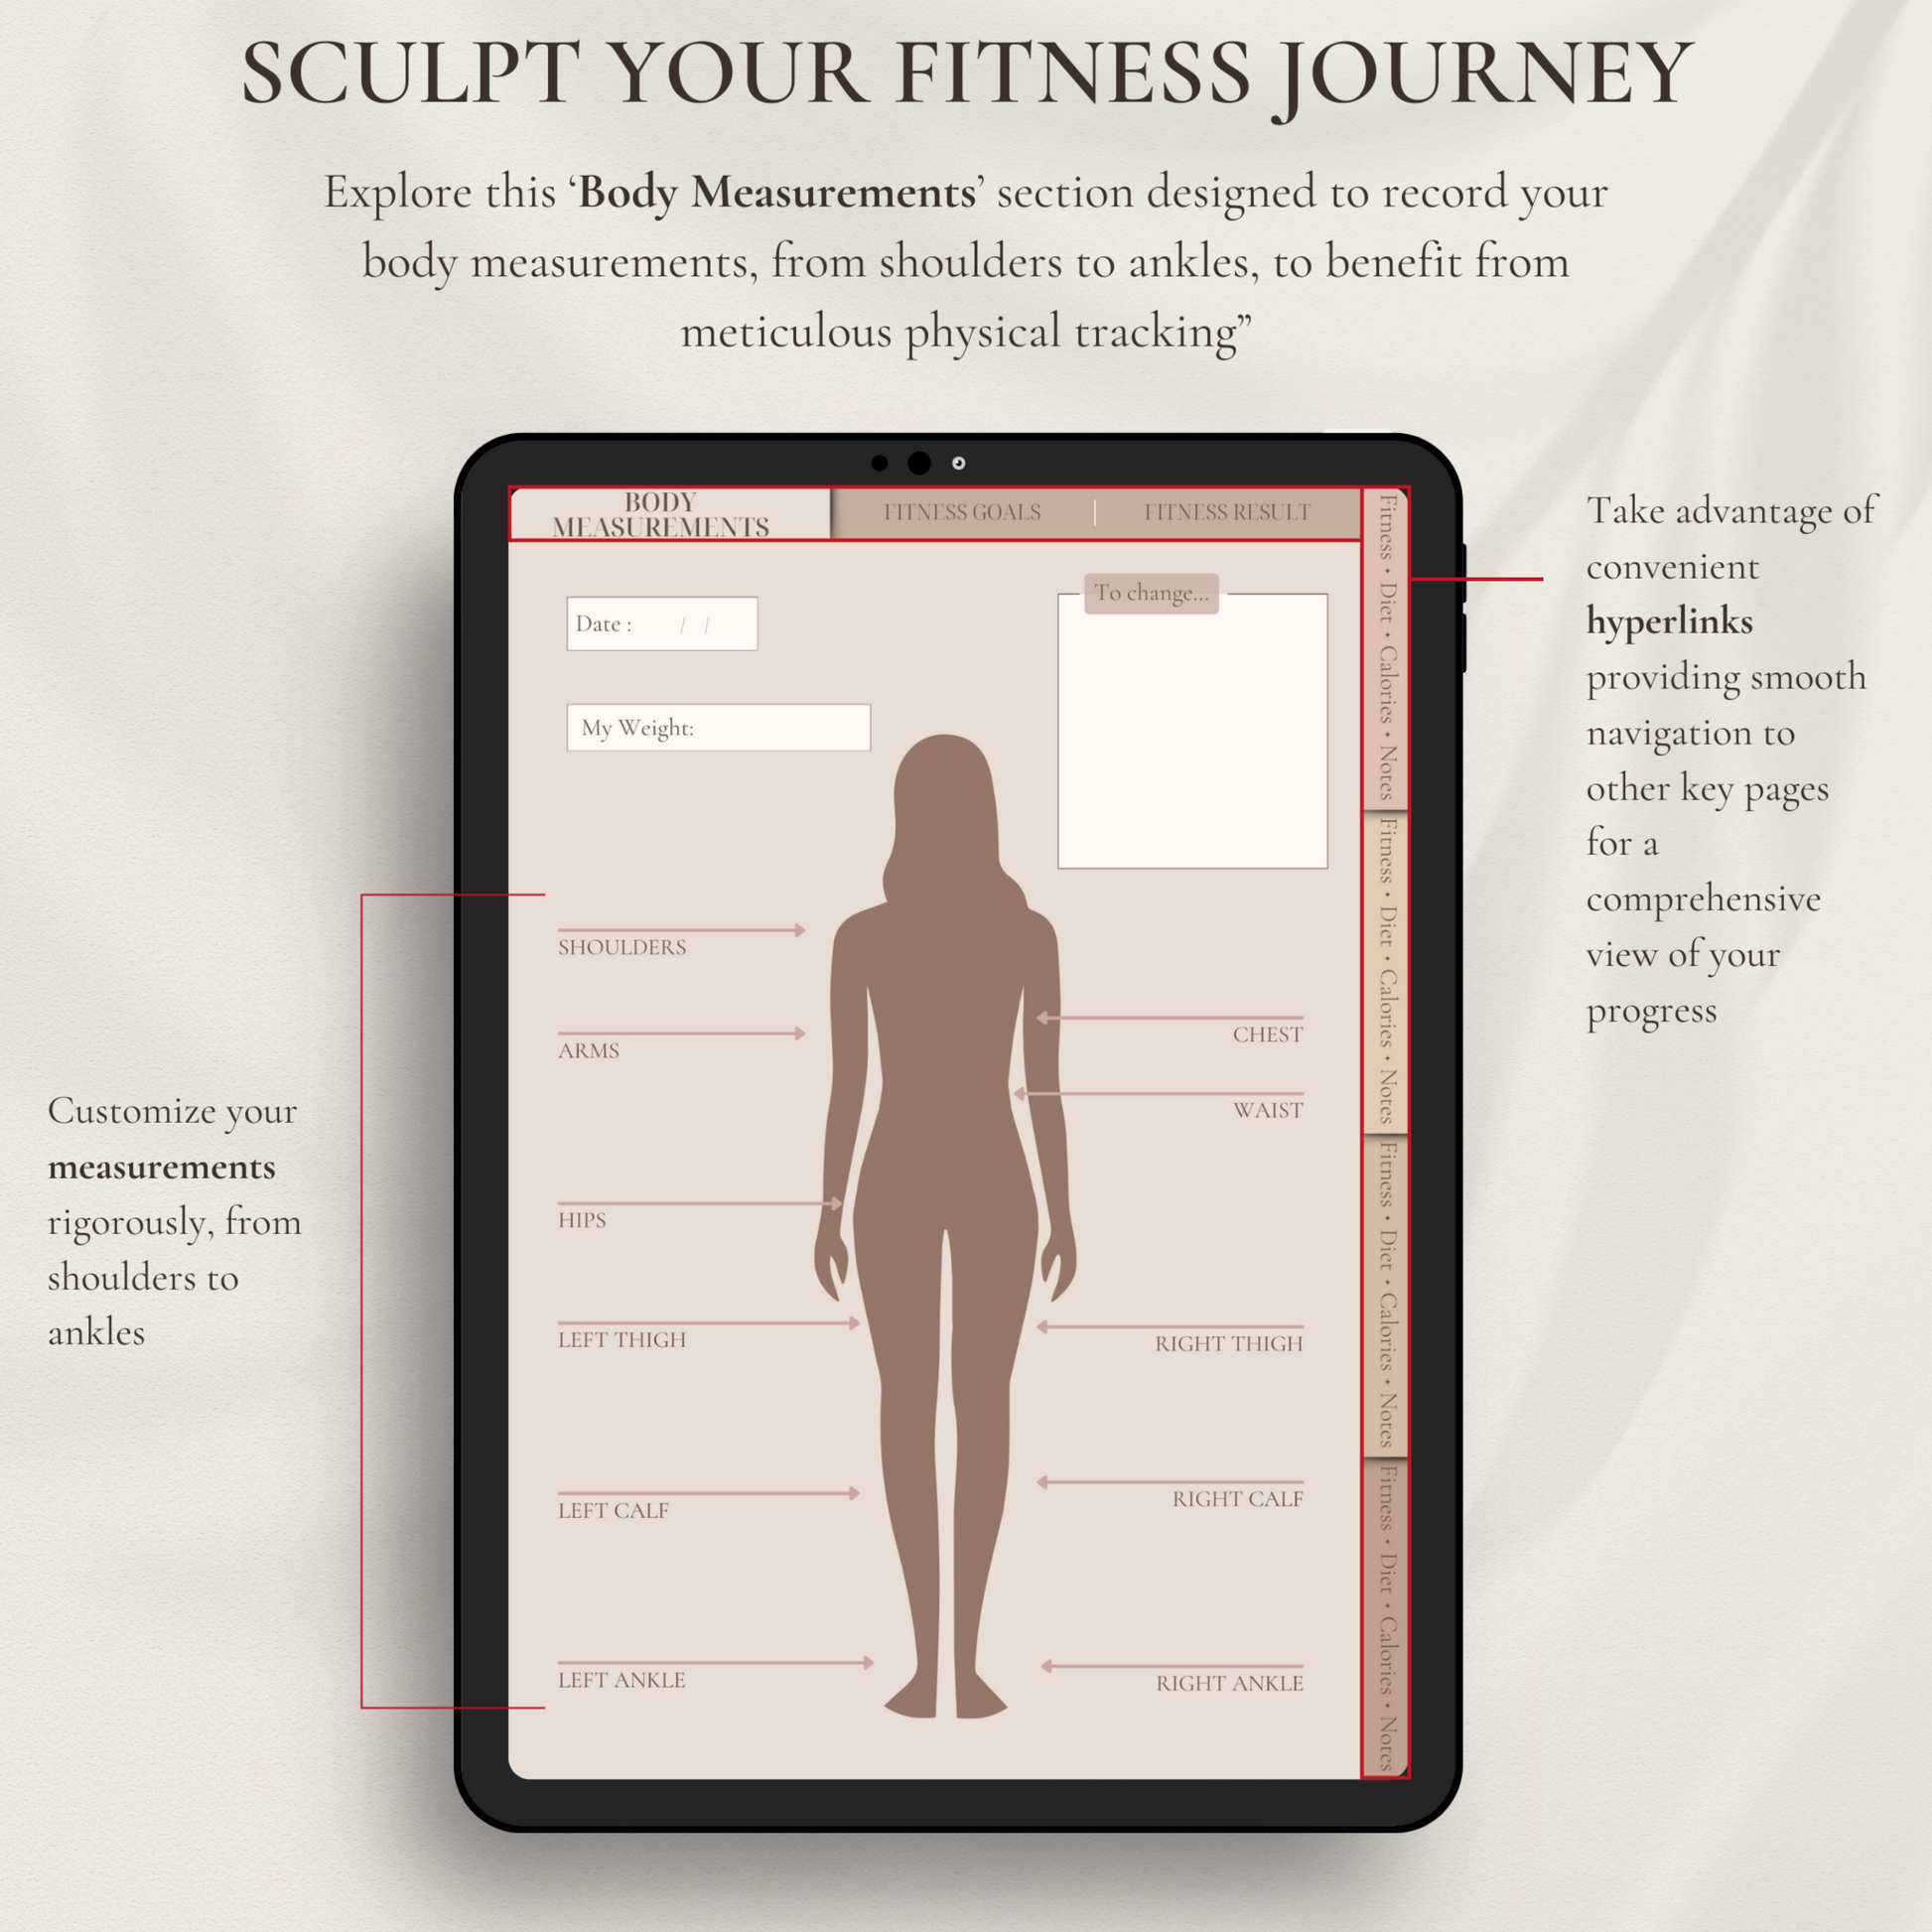 Explore this 'Body Measurements' section designed to record your body measurements, from shoulders to ankles, to benefit from meticulous physical tracking